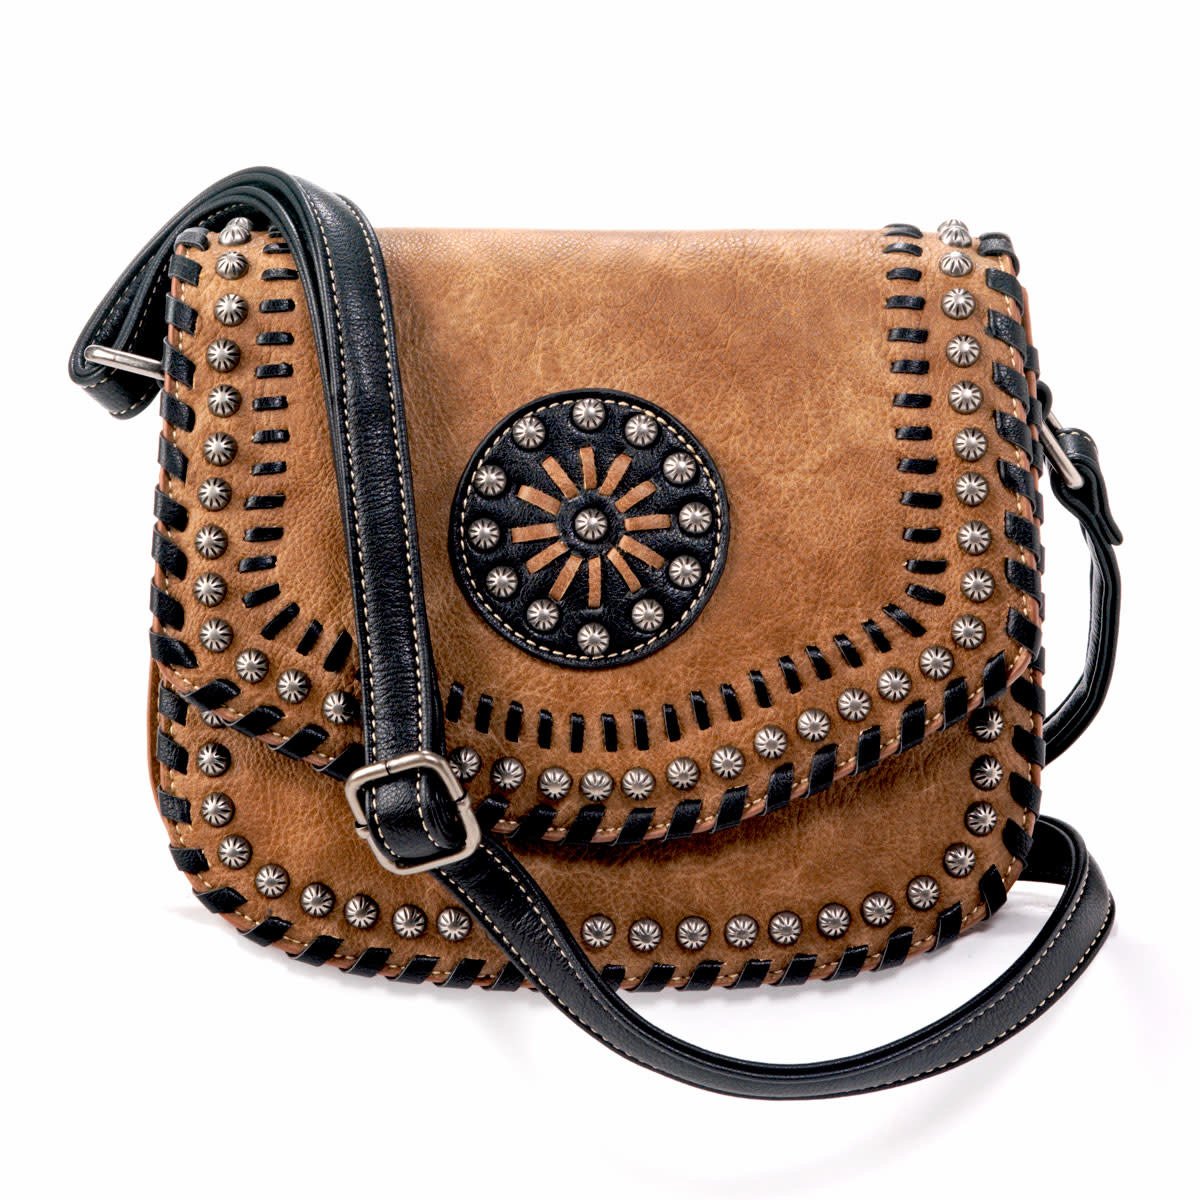 Concealed Carry Purse with Fringe - Cowboy Boot Purse - Crossbody Conceal Carry Purse